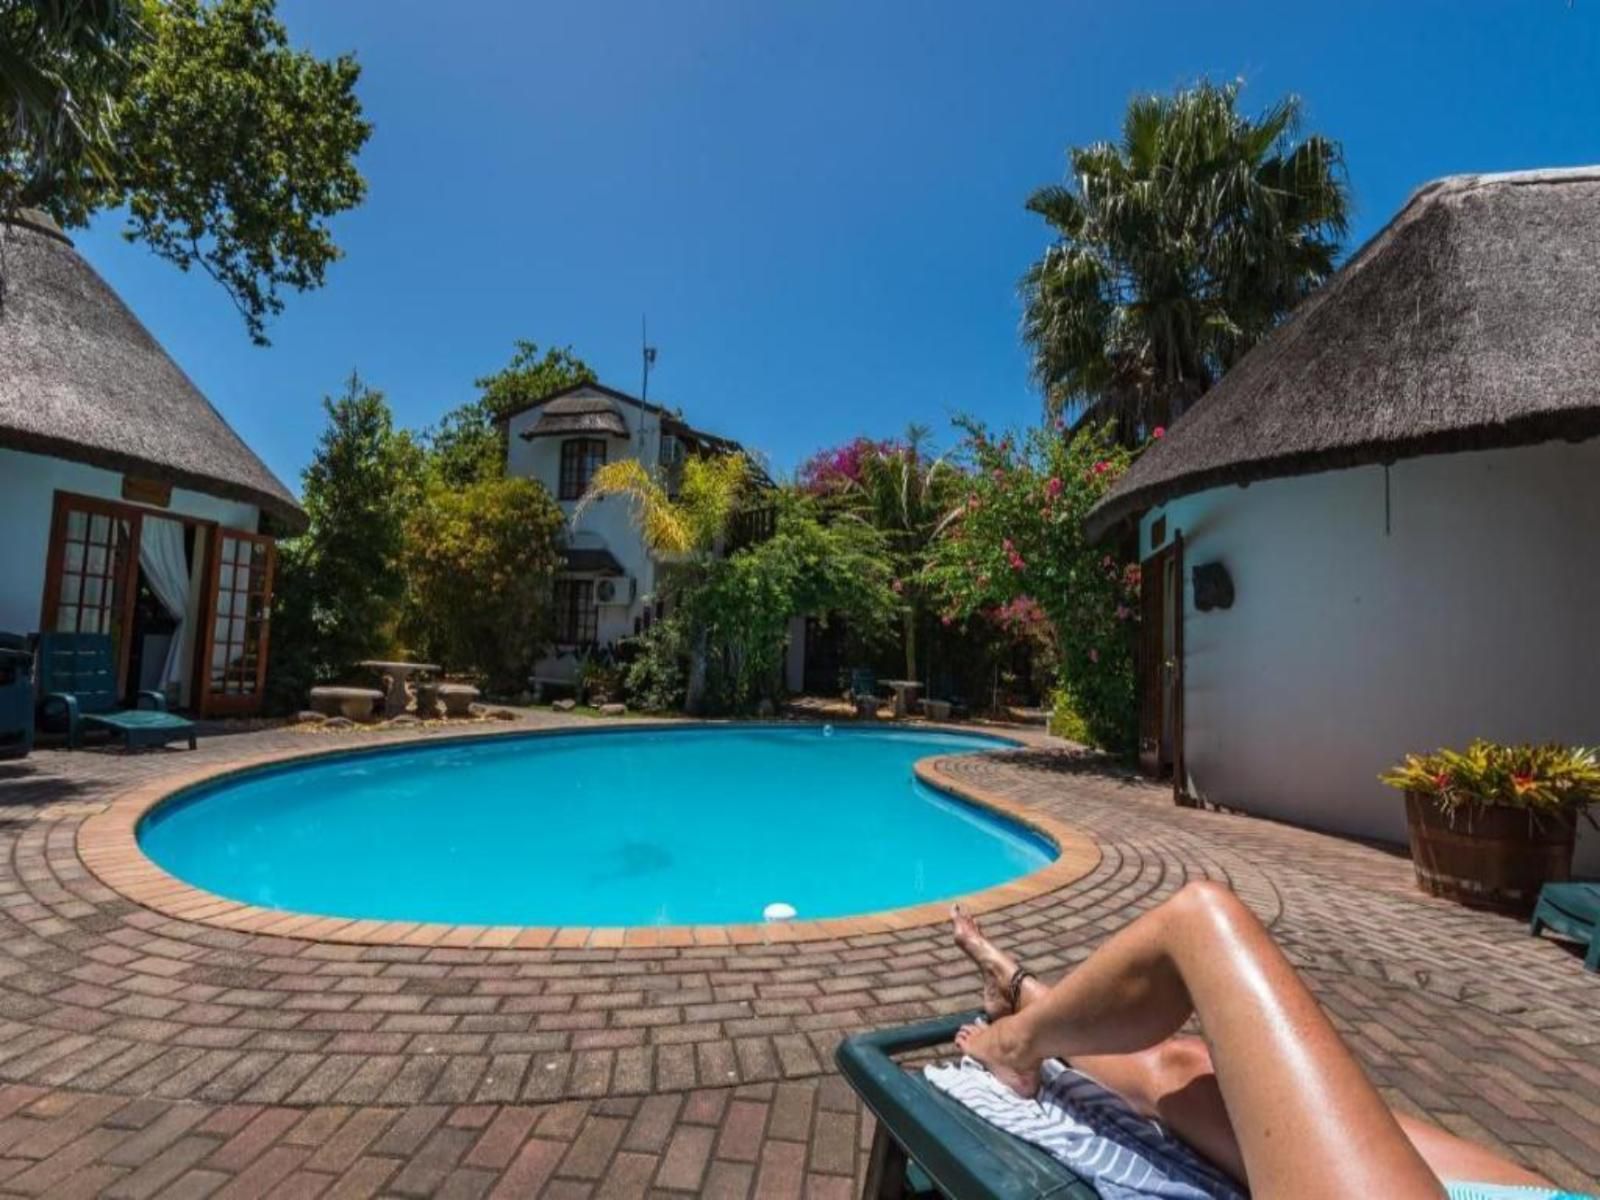 French Lodge International Dormehlsdrift George Western Cape South Africa House, Building, Architecture, Palm Tree, Plant, Nature, Wood, Swimming Pool